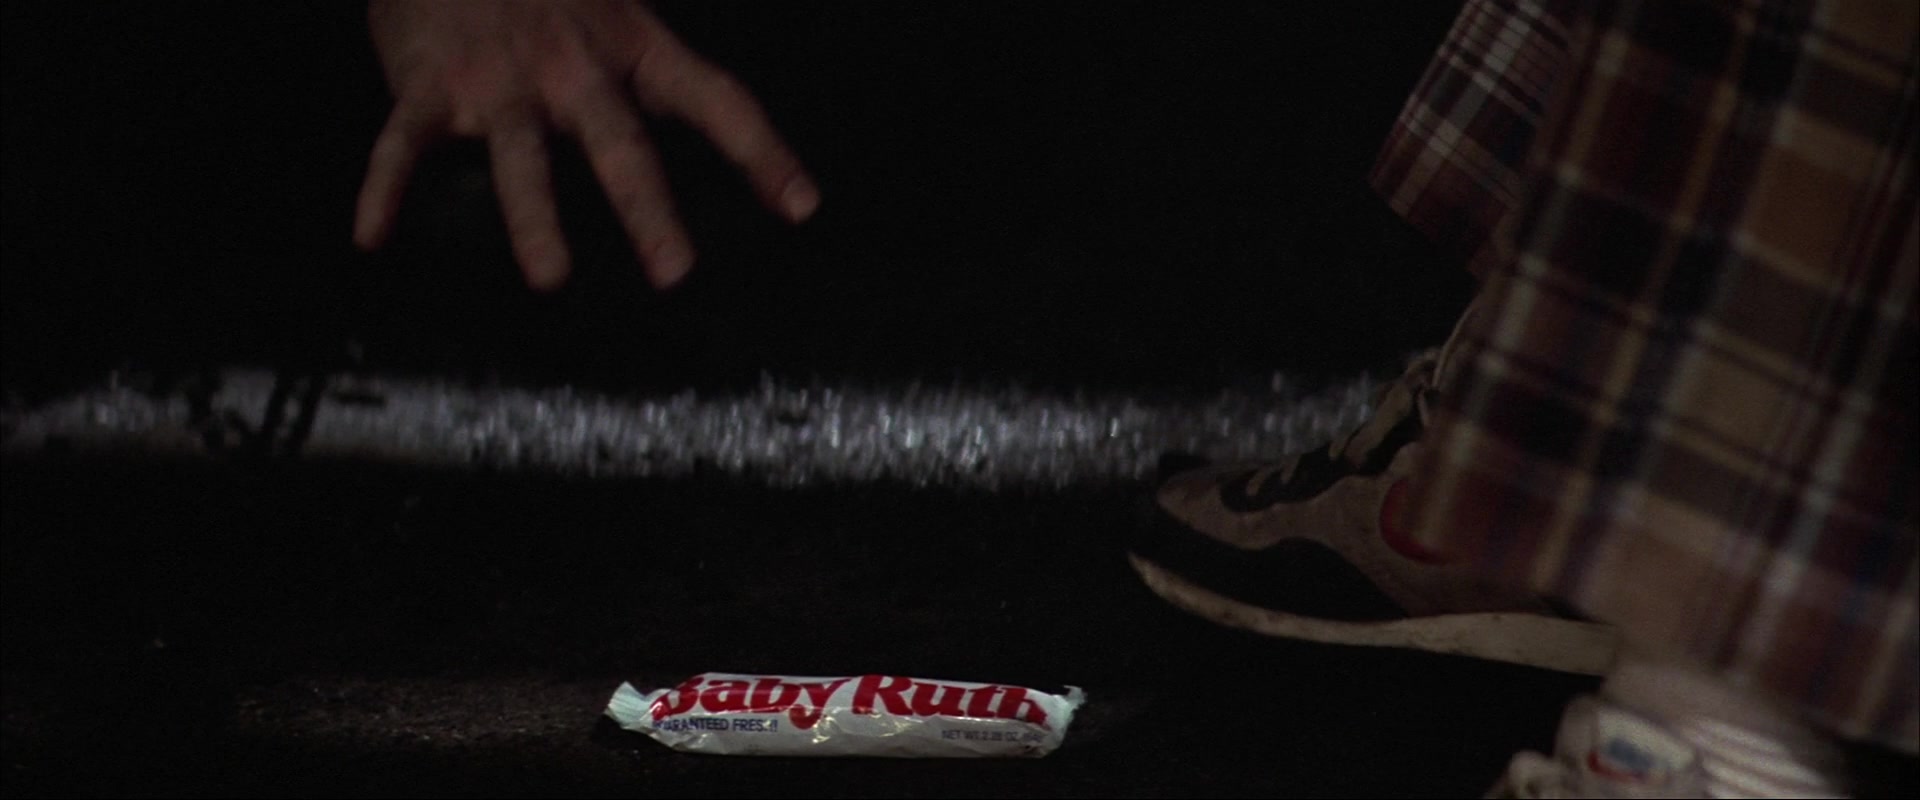 Baby Ruth Candy Bar In The Goonies (1985)